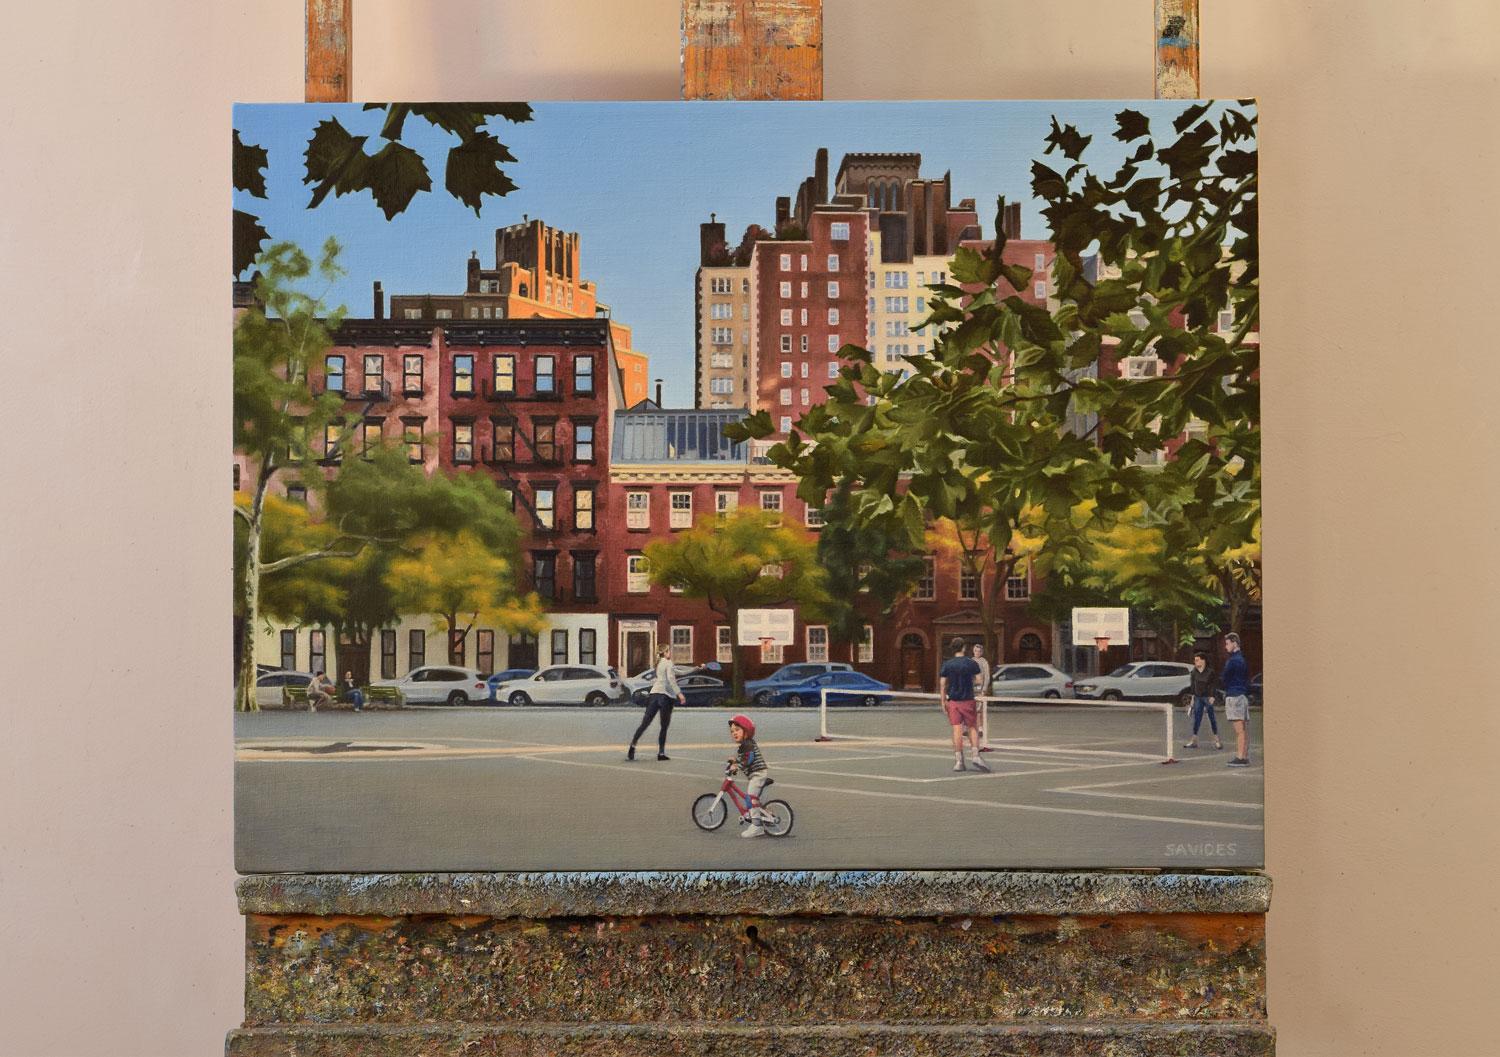 <p>Artist Comments<br>Artist Nick Savides shows the Seravalli Playground on Gansevoort, bathed in the warm glow of late afternoon sunlight. The orange hues of the one building contrast against the clear blue sky. A group of people play pickleball